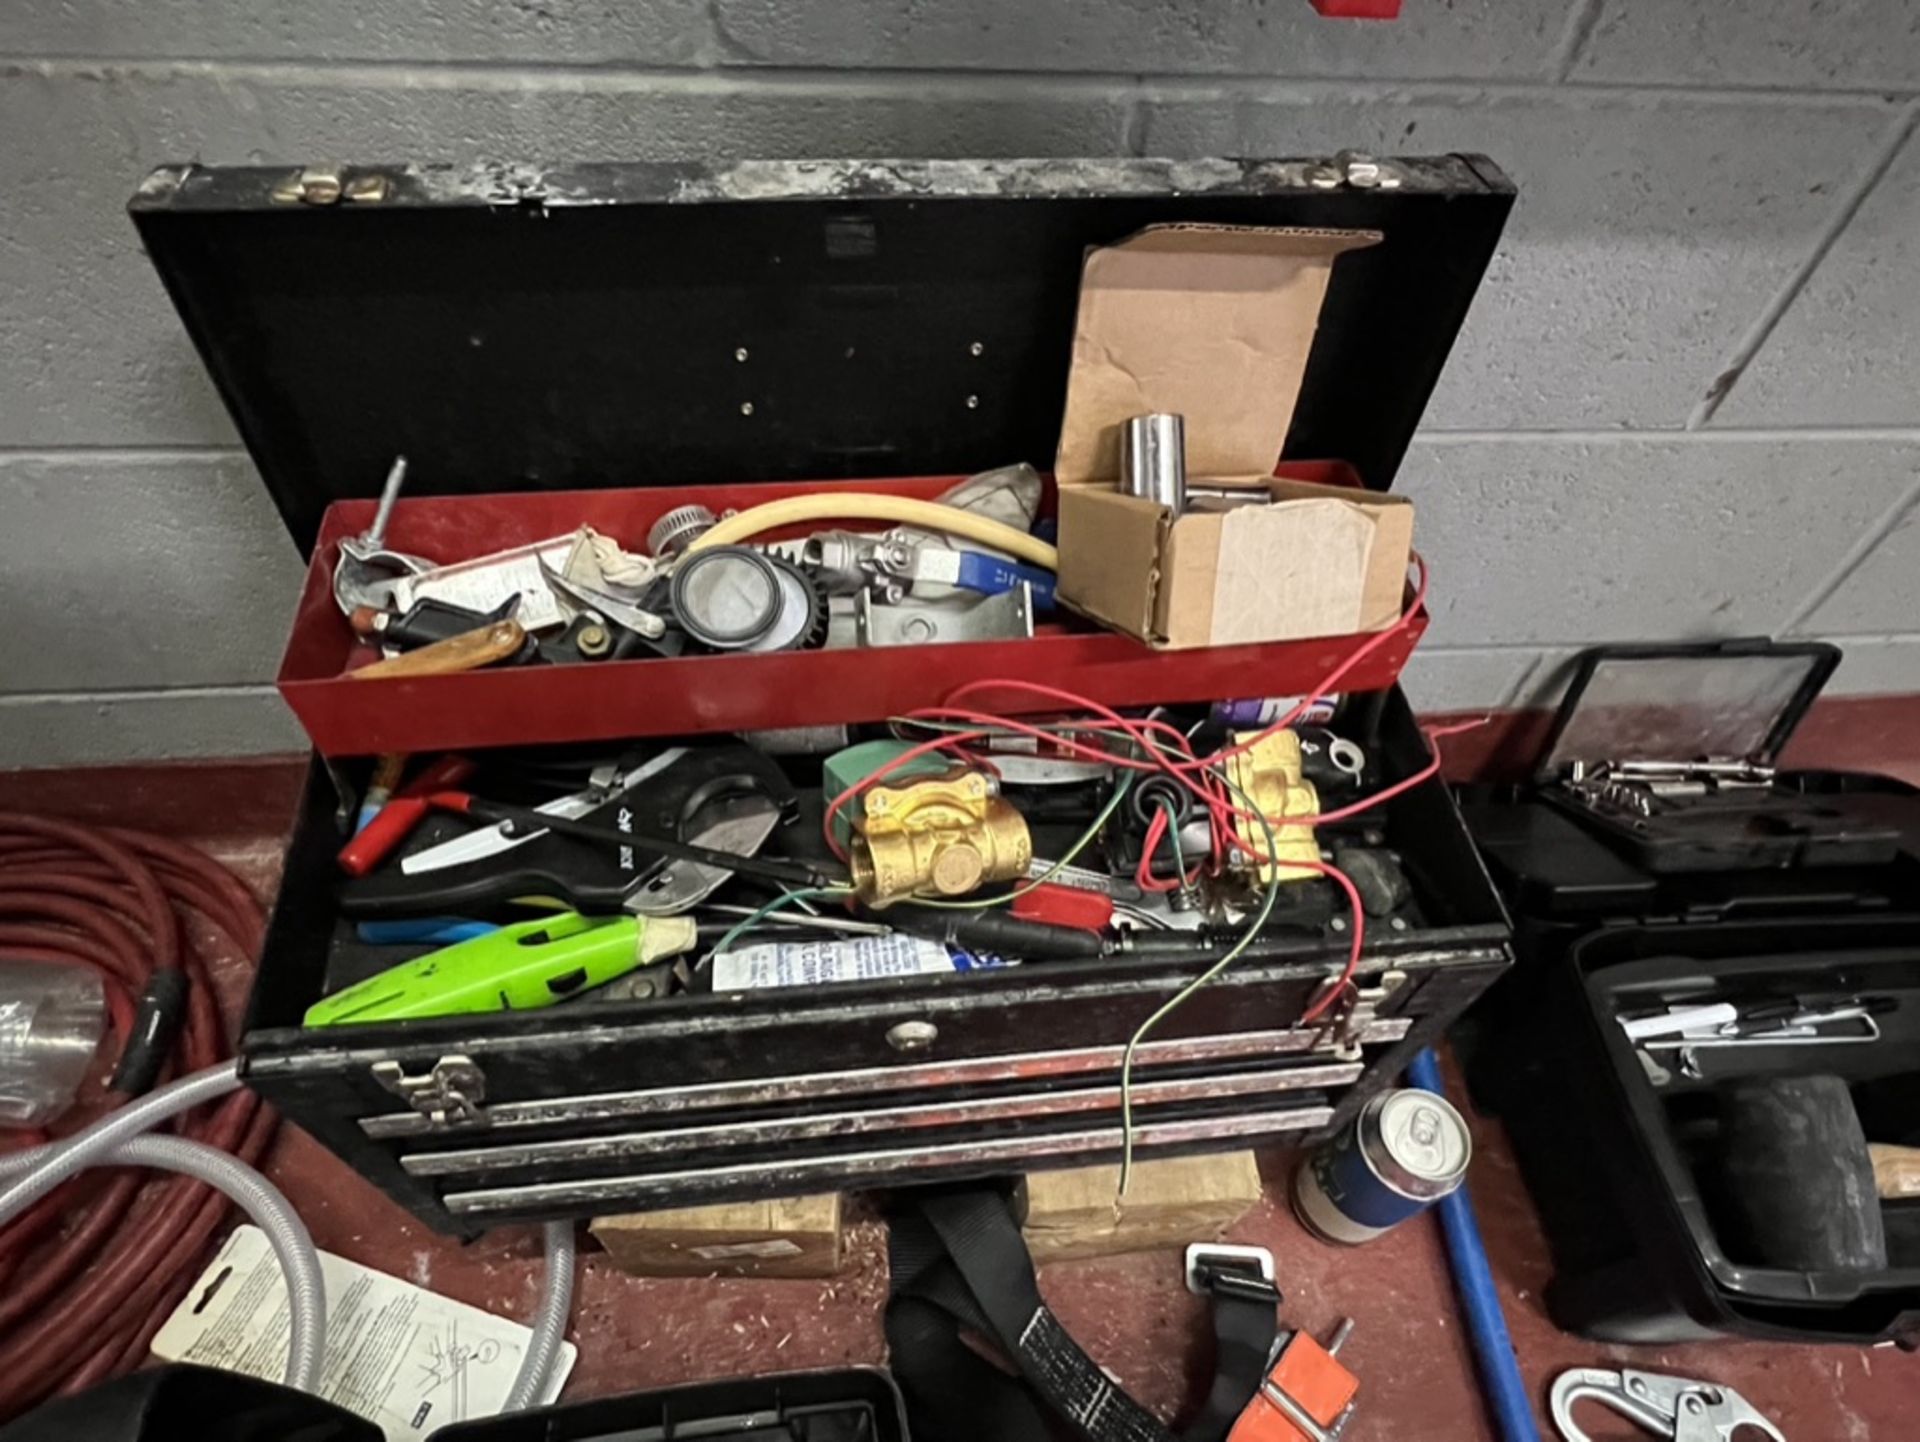 LOT OF: (2) PLASTIC TOOL BOXES, (1) METAL CRAFTSMAN TOOL BOX AND PICTURED SMALL TOOLS, DRILL BITS, - Image 3 of 15